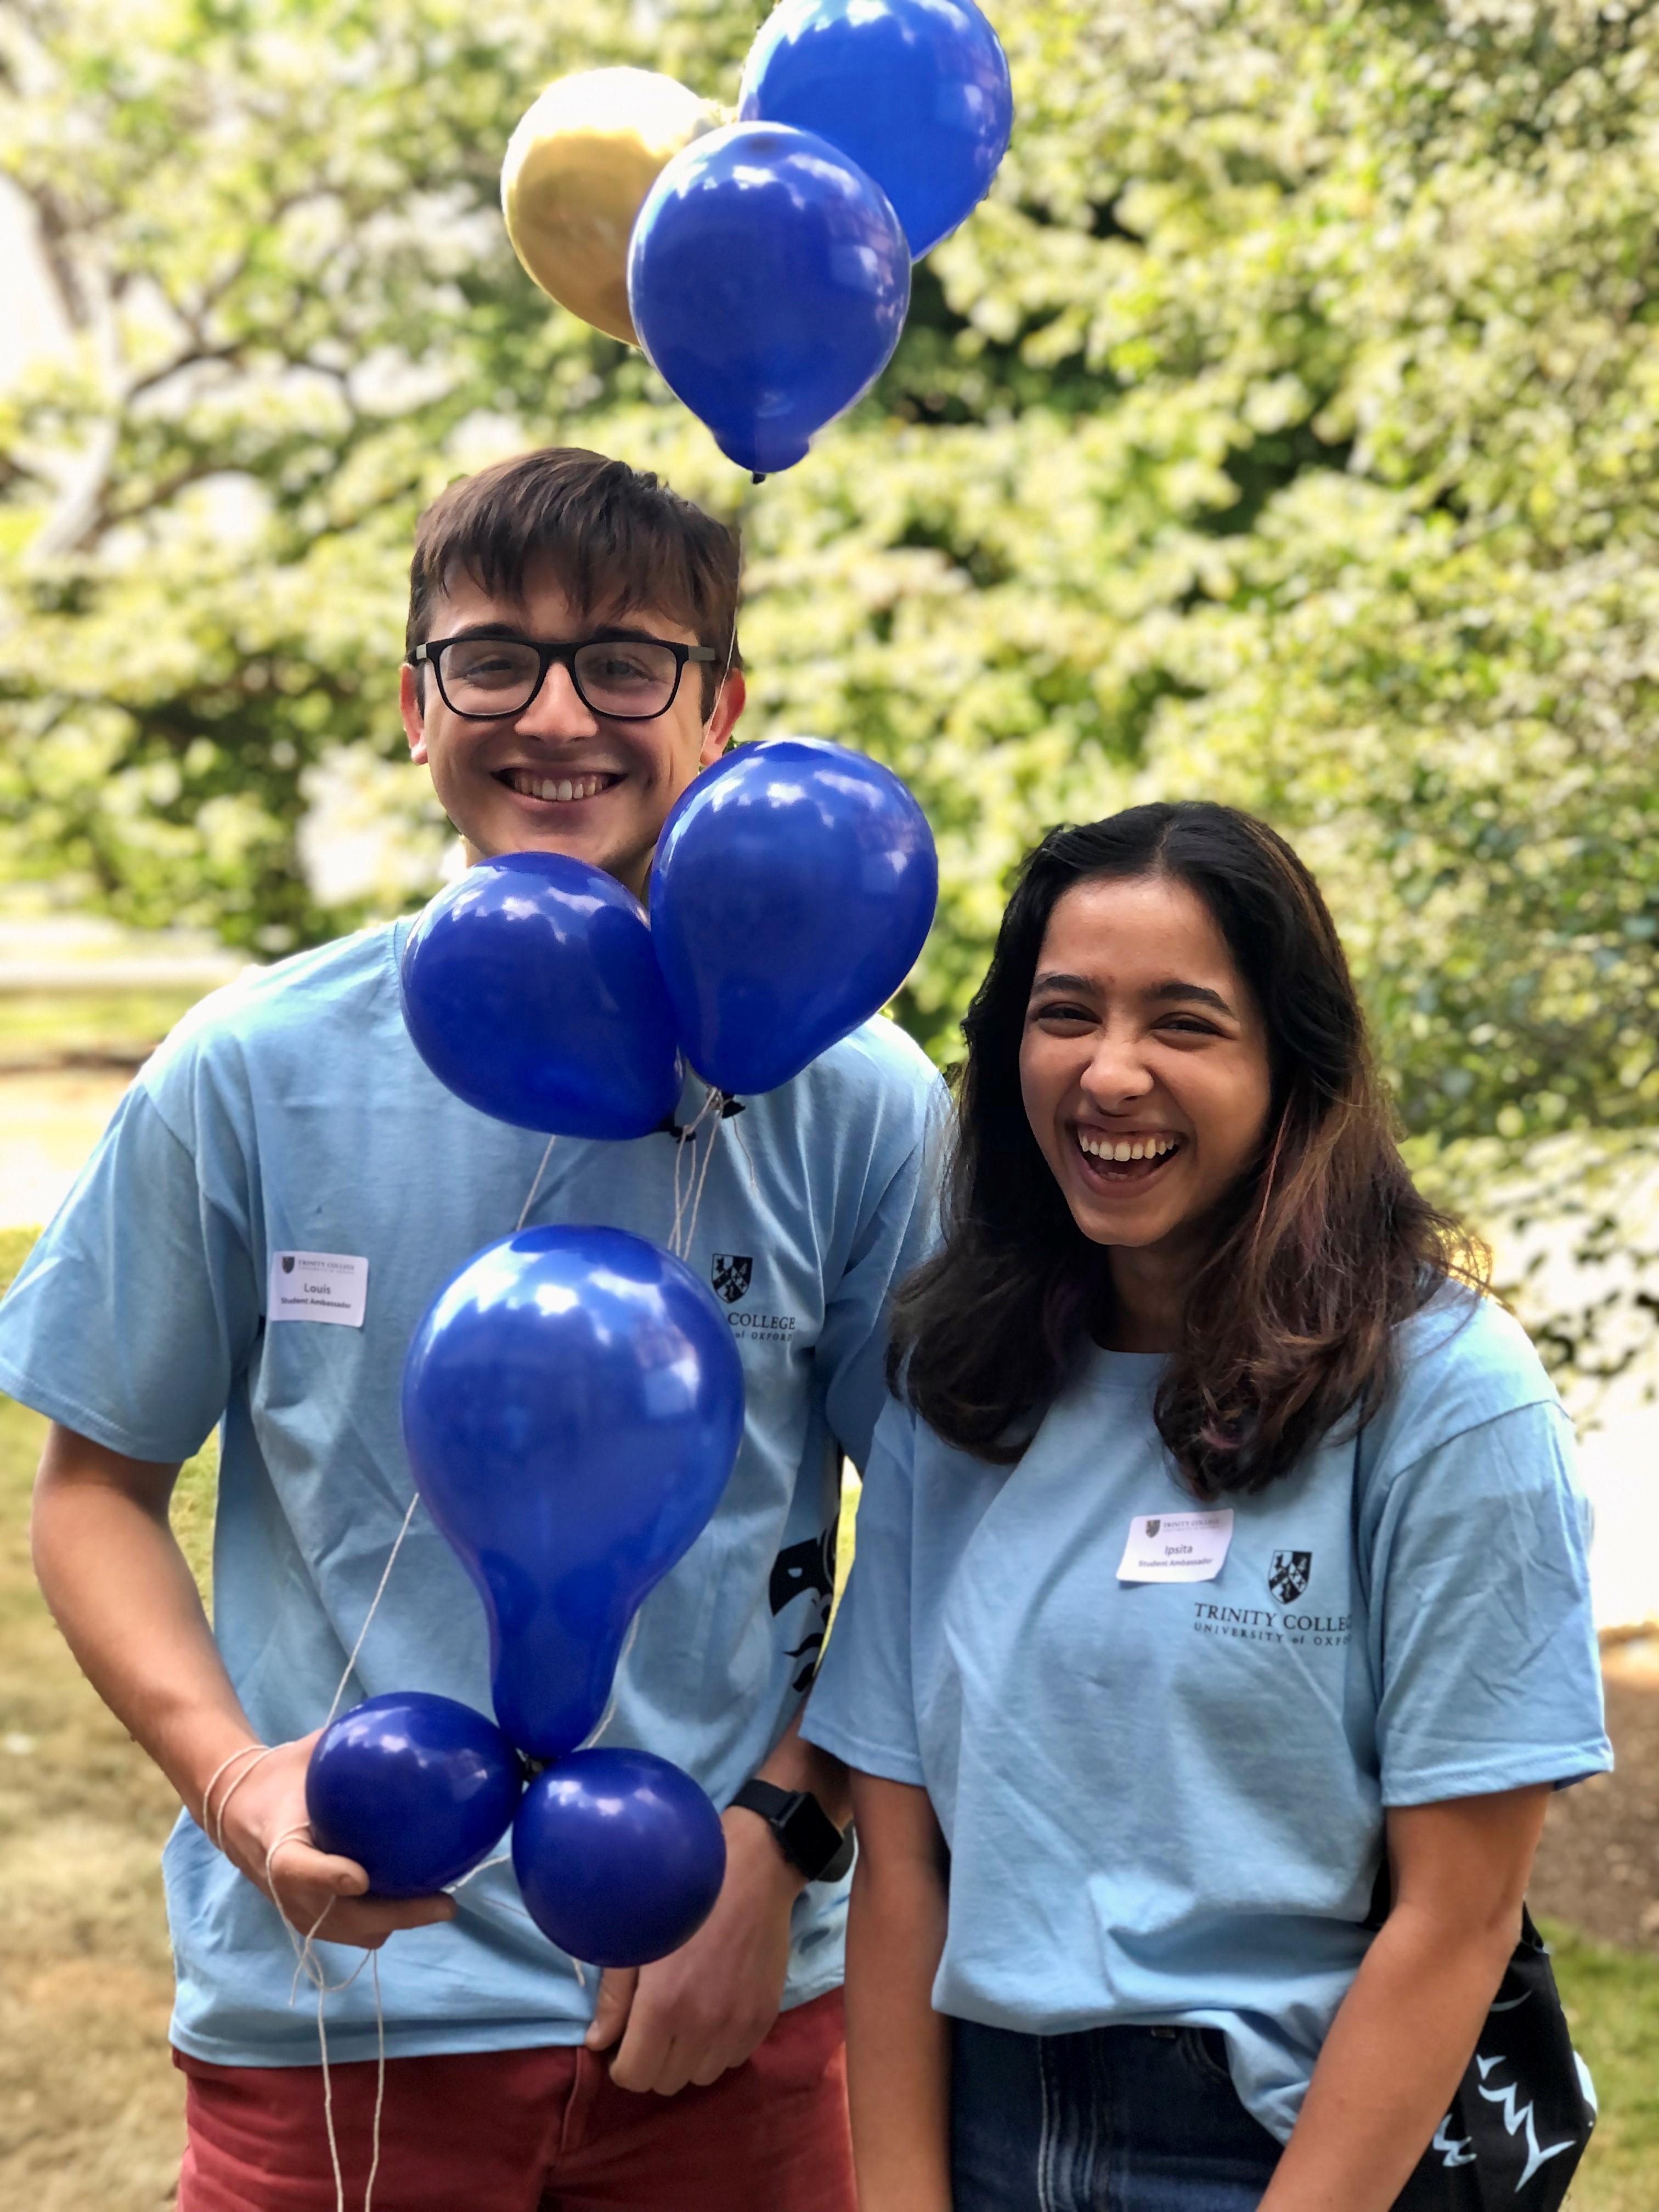 Two Trinity student ambassadors stand holding balloons for open days.